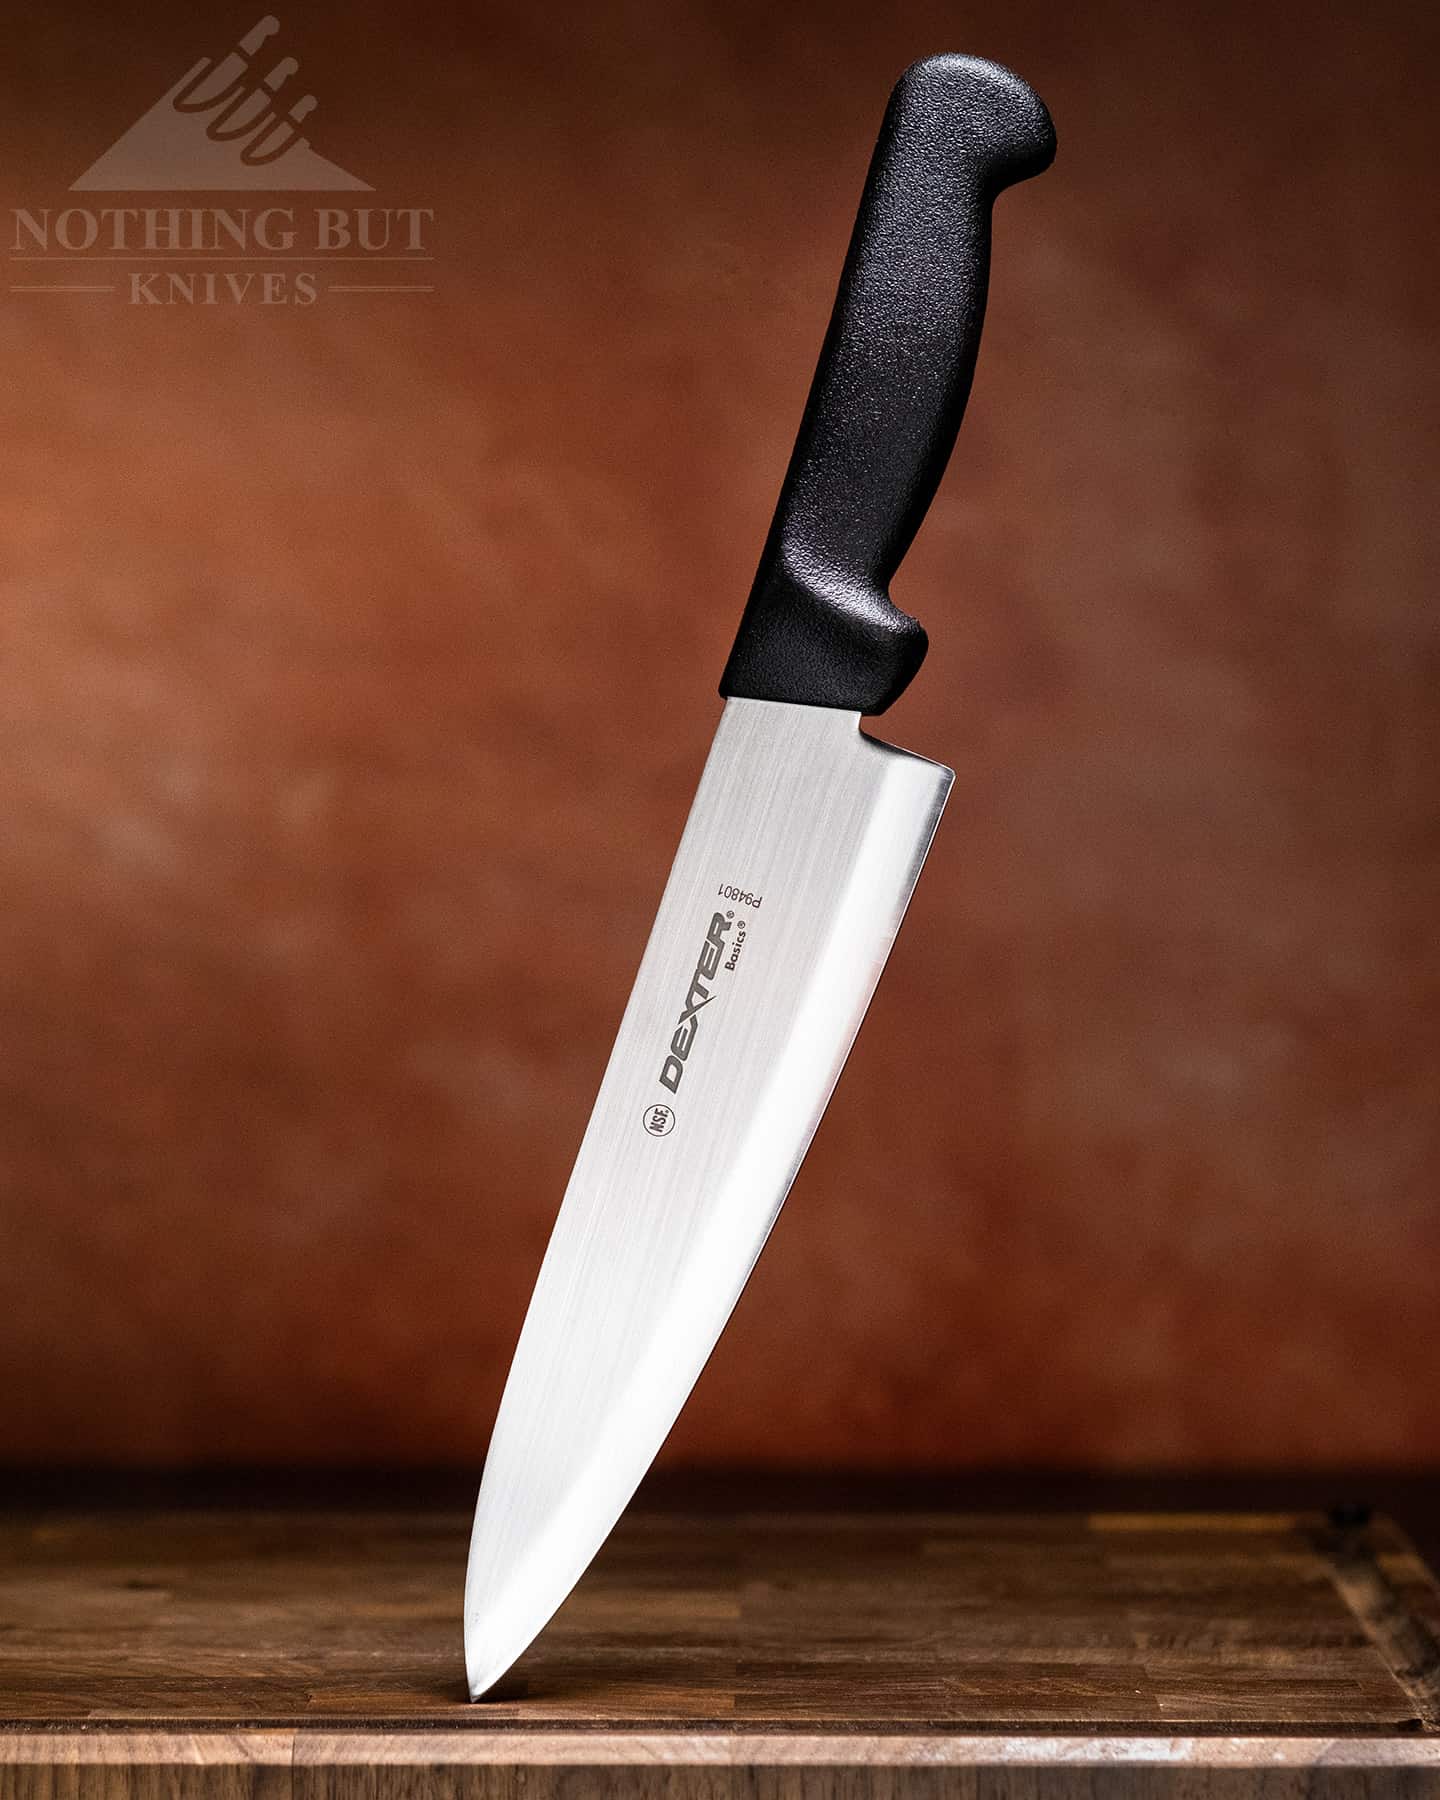 The Dexter RUssel Basics chef knife is one of the most affordable chef knives manufactured in the United States.